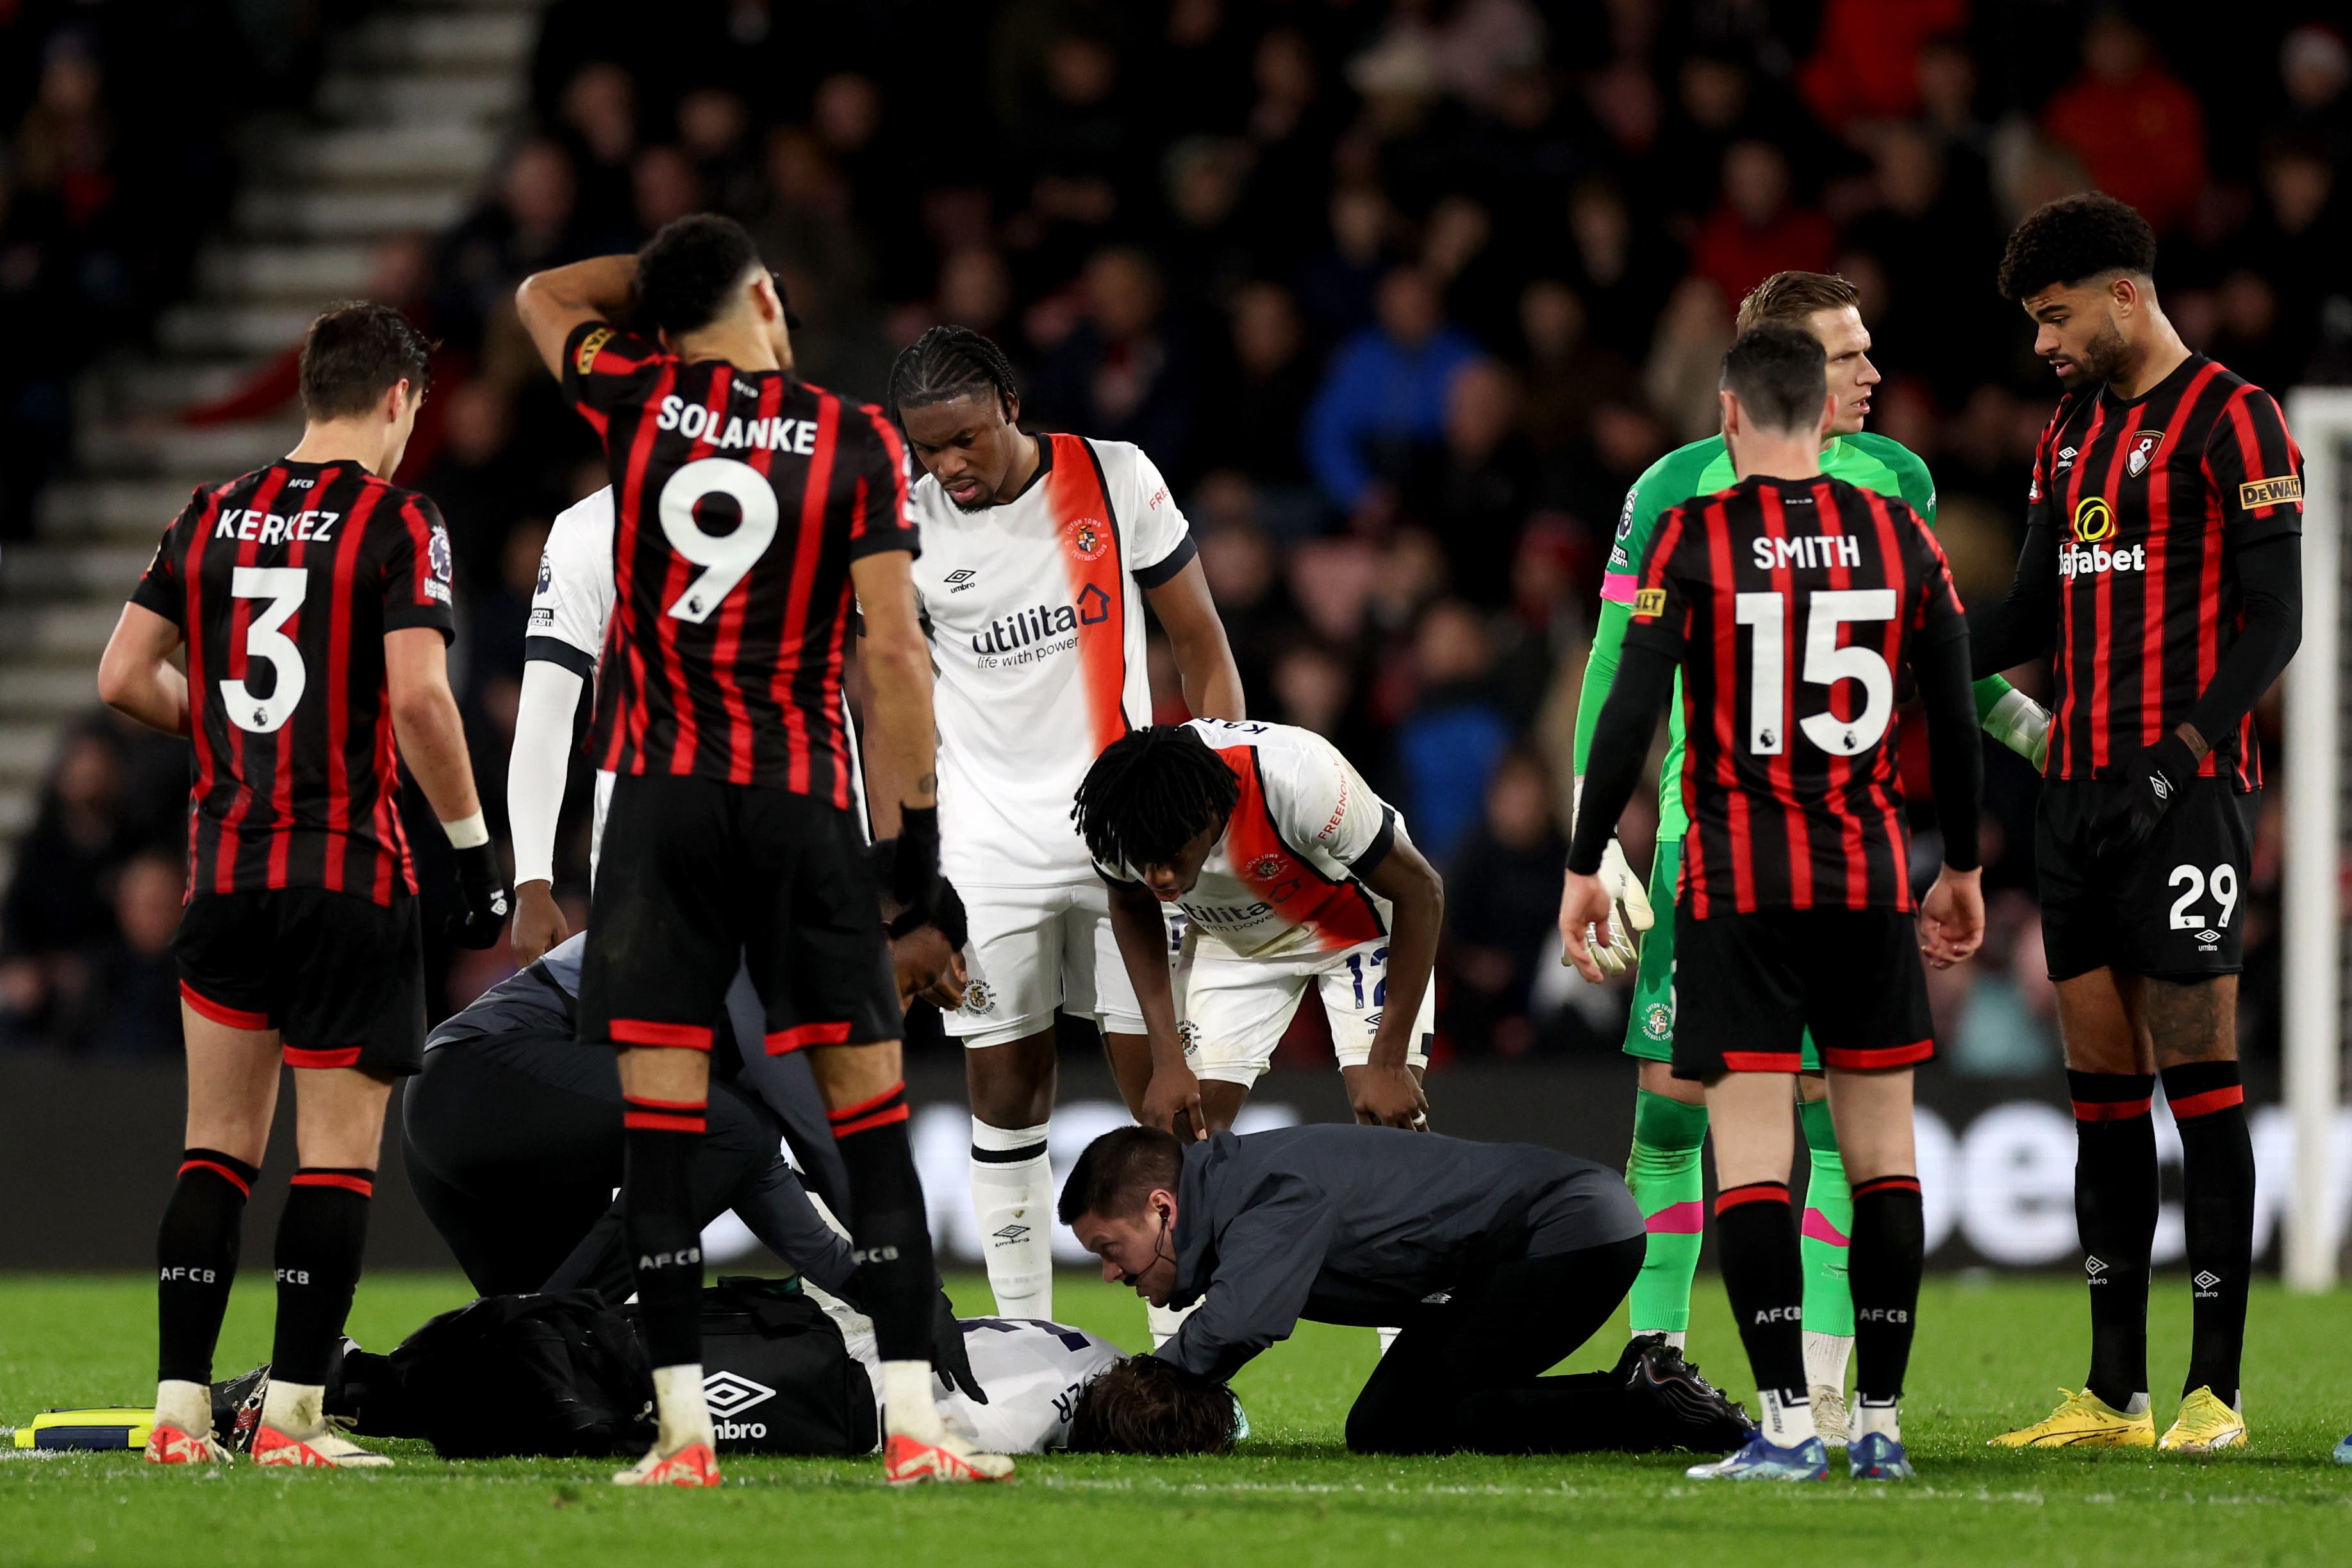 Bournemouth will stay focused during emotional clash with Luton – Andoni Iraola | The Independent